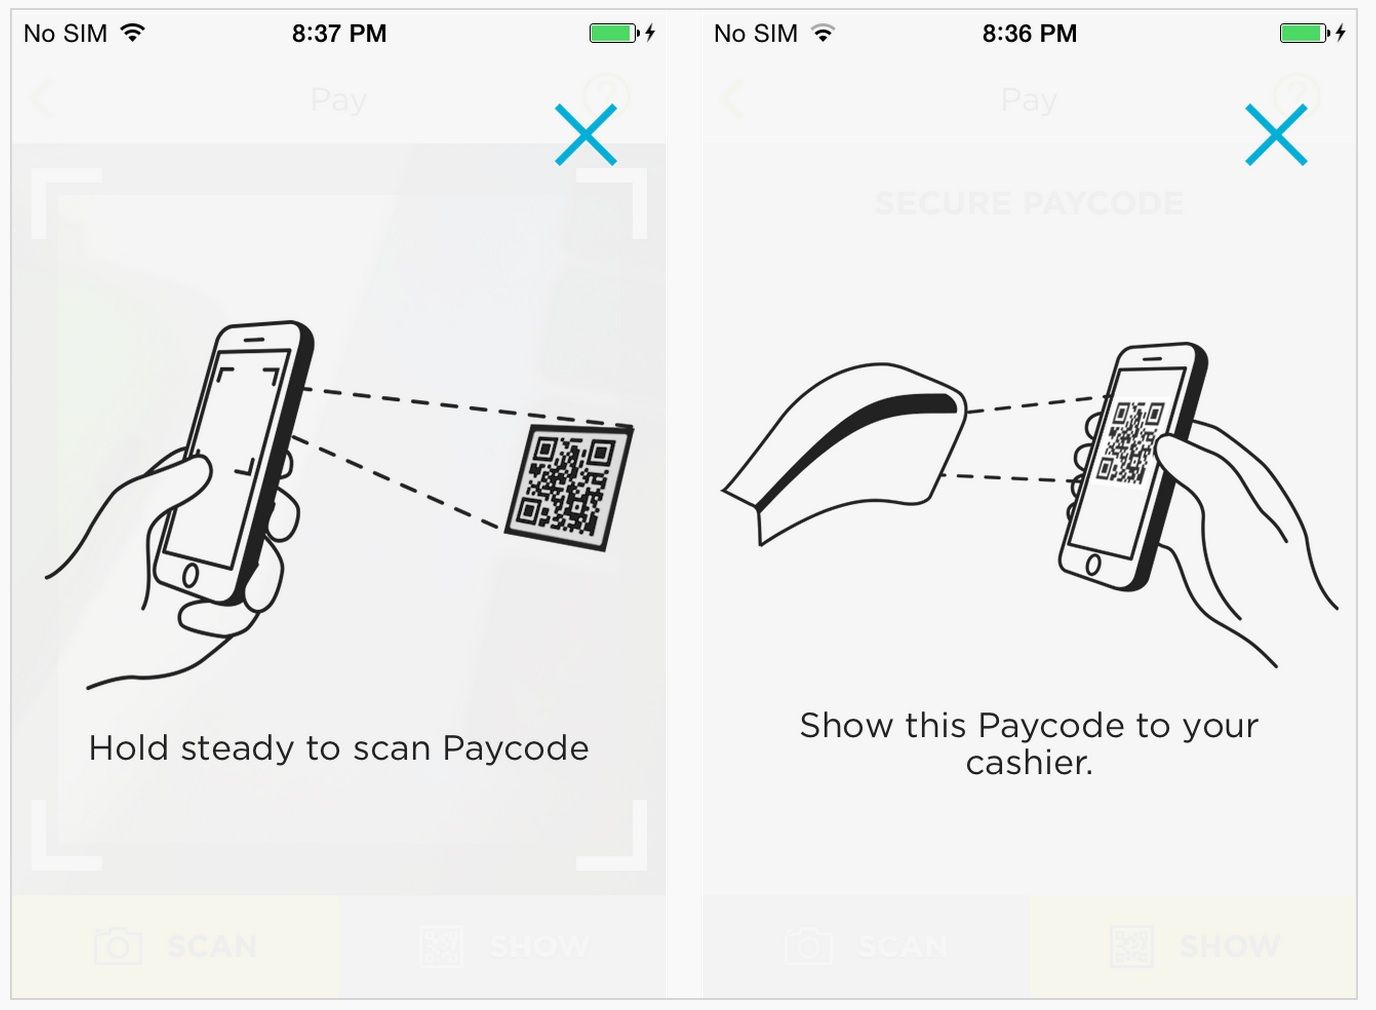 How to use CurrentC mobile pay using QR codes. Sigh.